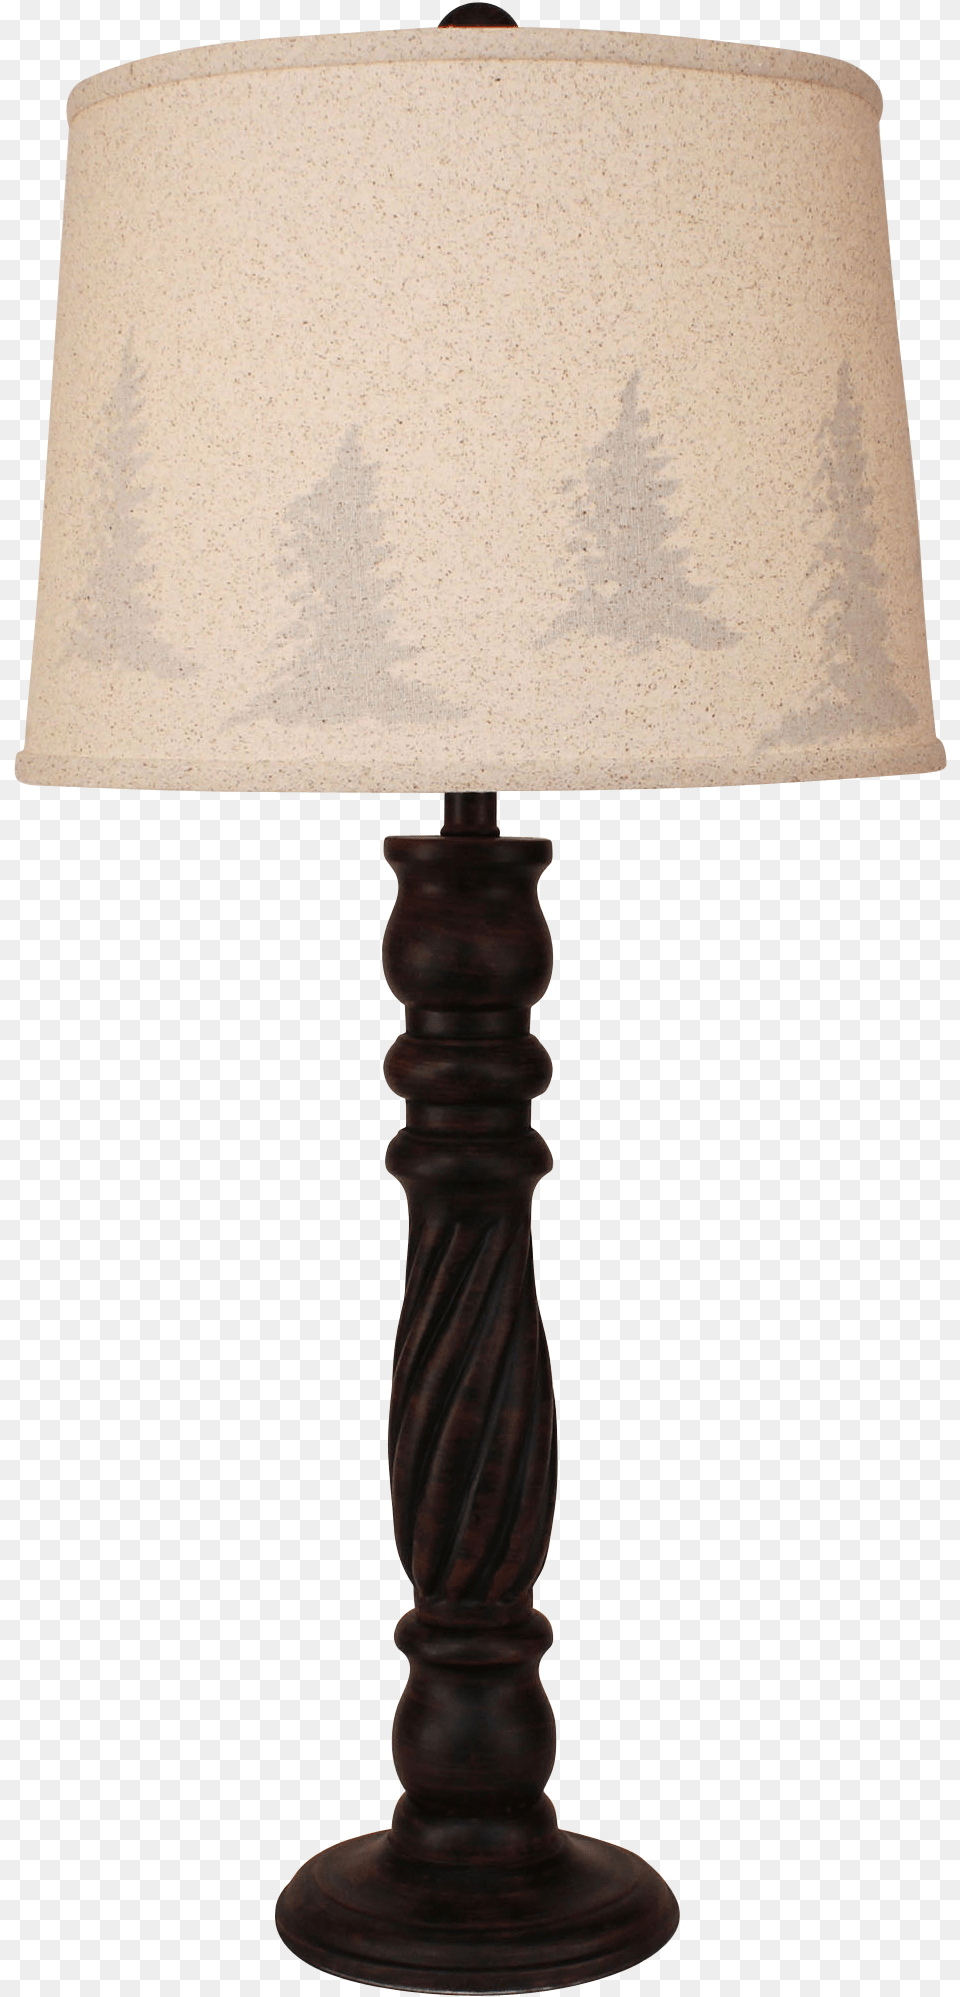 Burnt Sienna Swirl Table Lamp Tree Silhouette Shade, Lampshade, Table Lamp Png Image